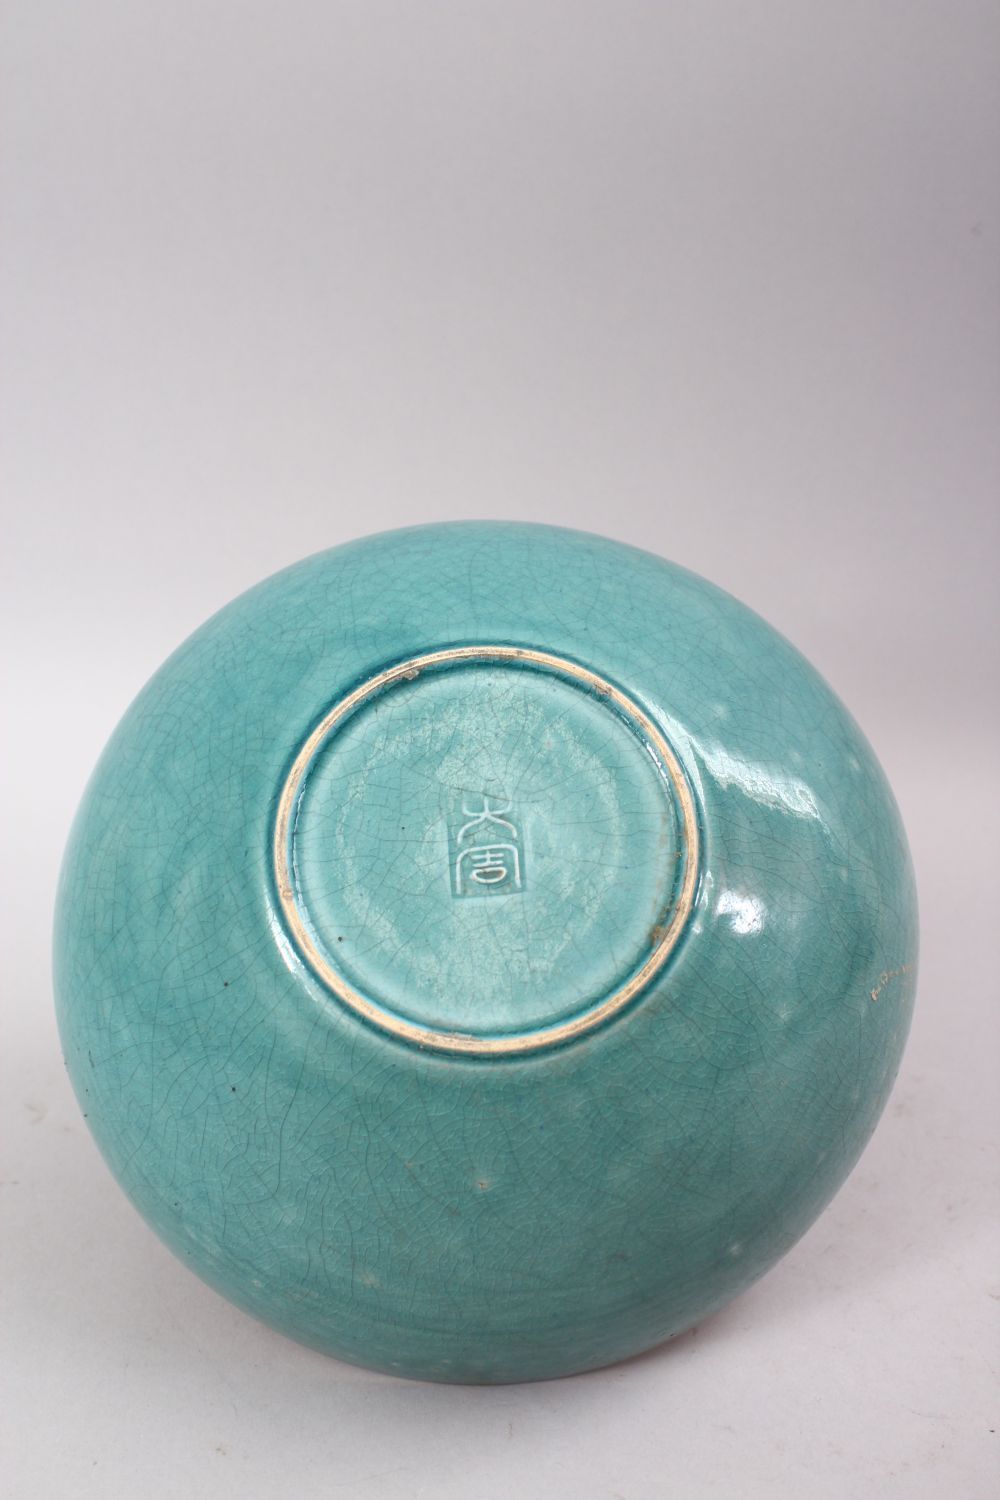 A CHINESE SONG STYLE CELADON CRACLE GLAZED POTTERY BOWL, the exterior with a blue ground and an - Image 4 of 5